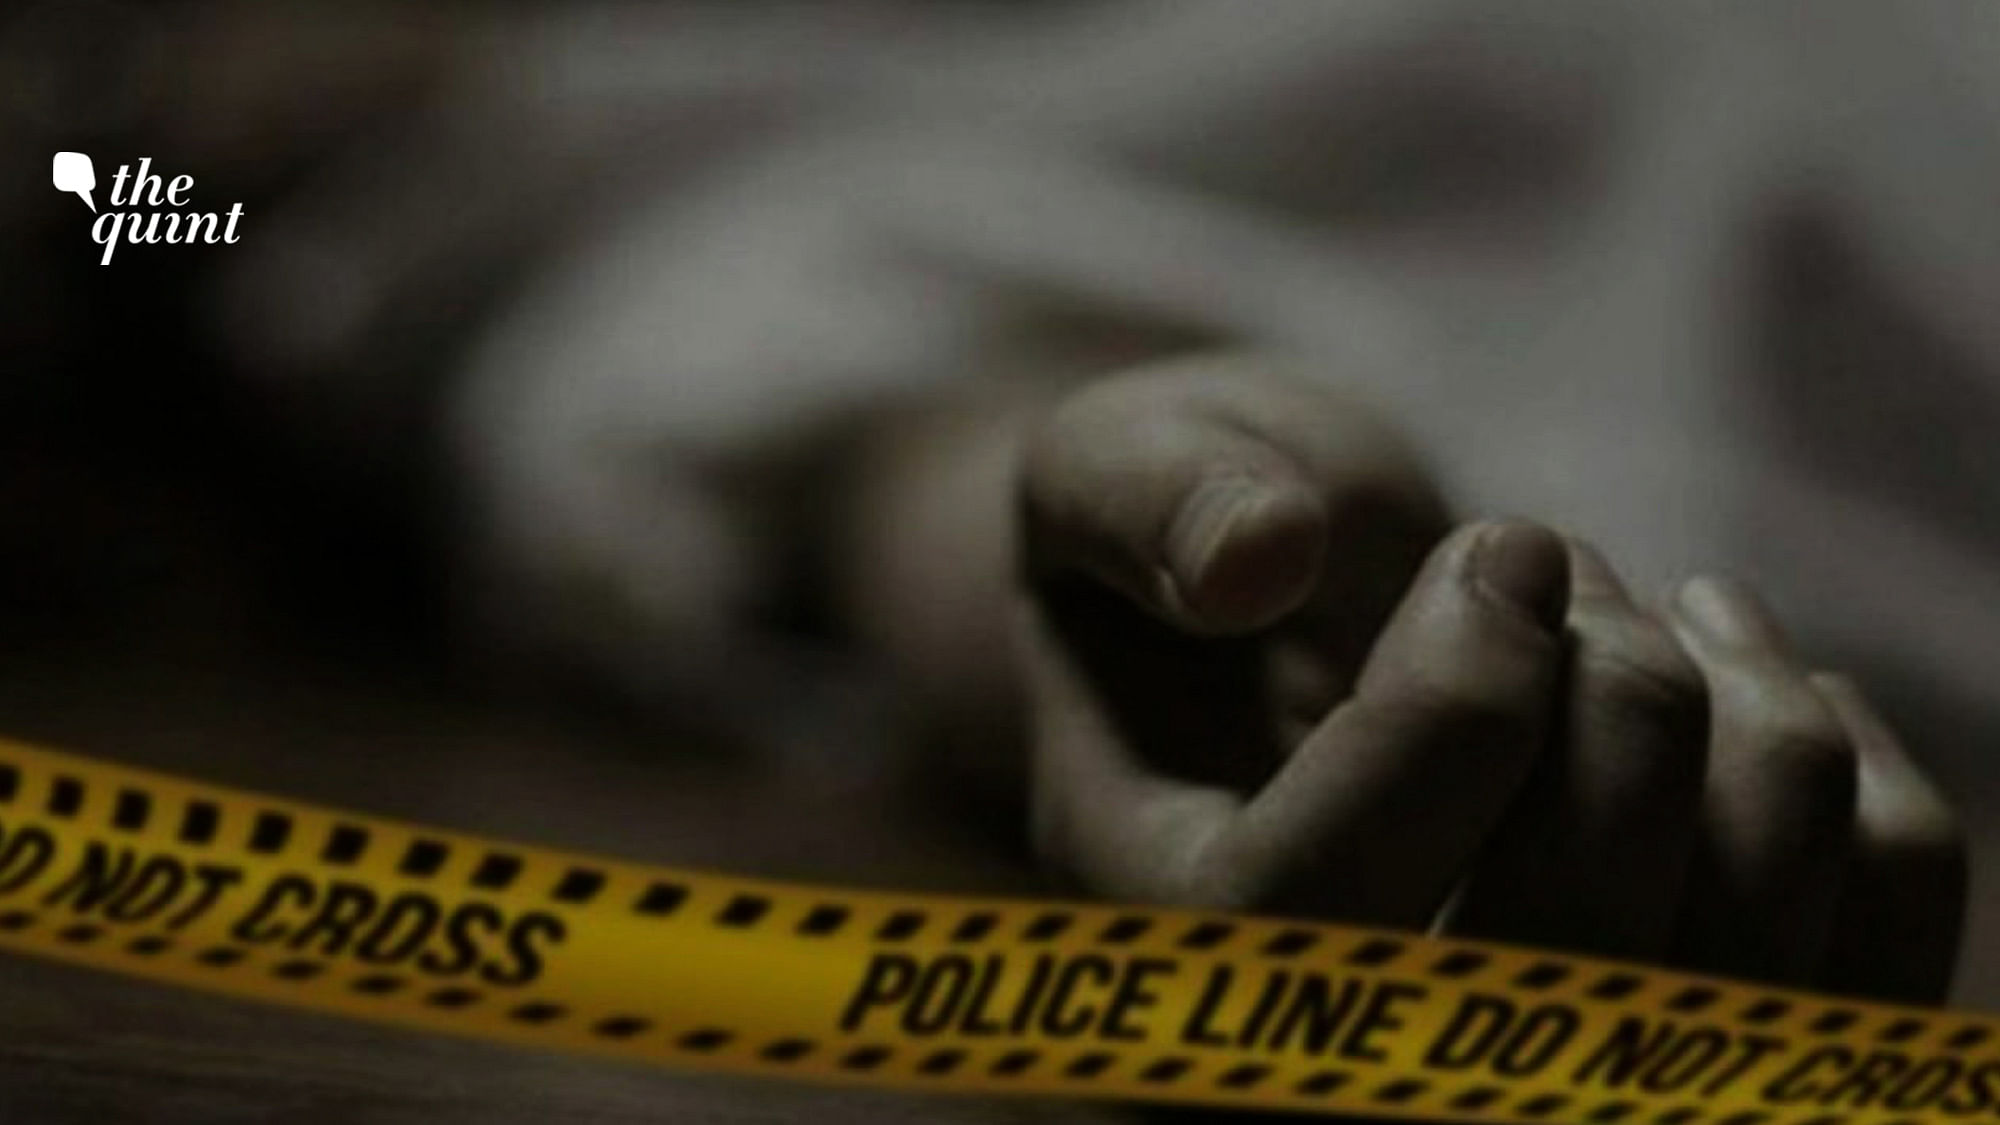 A Delhi doctor who worked in the COVID ward was found dead at his home.